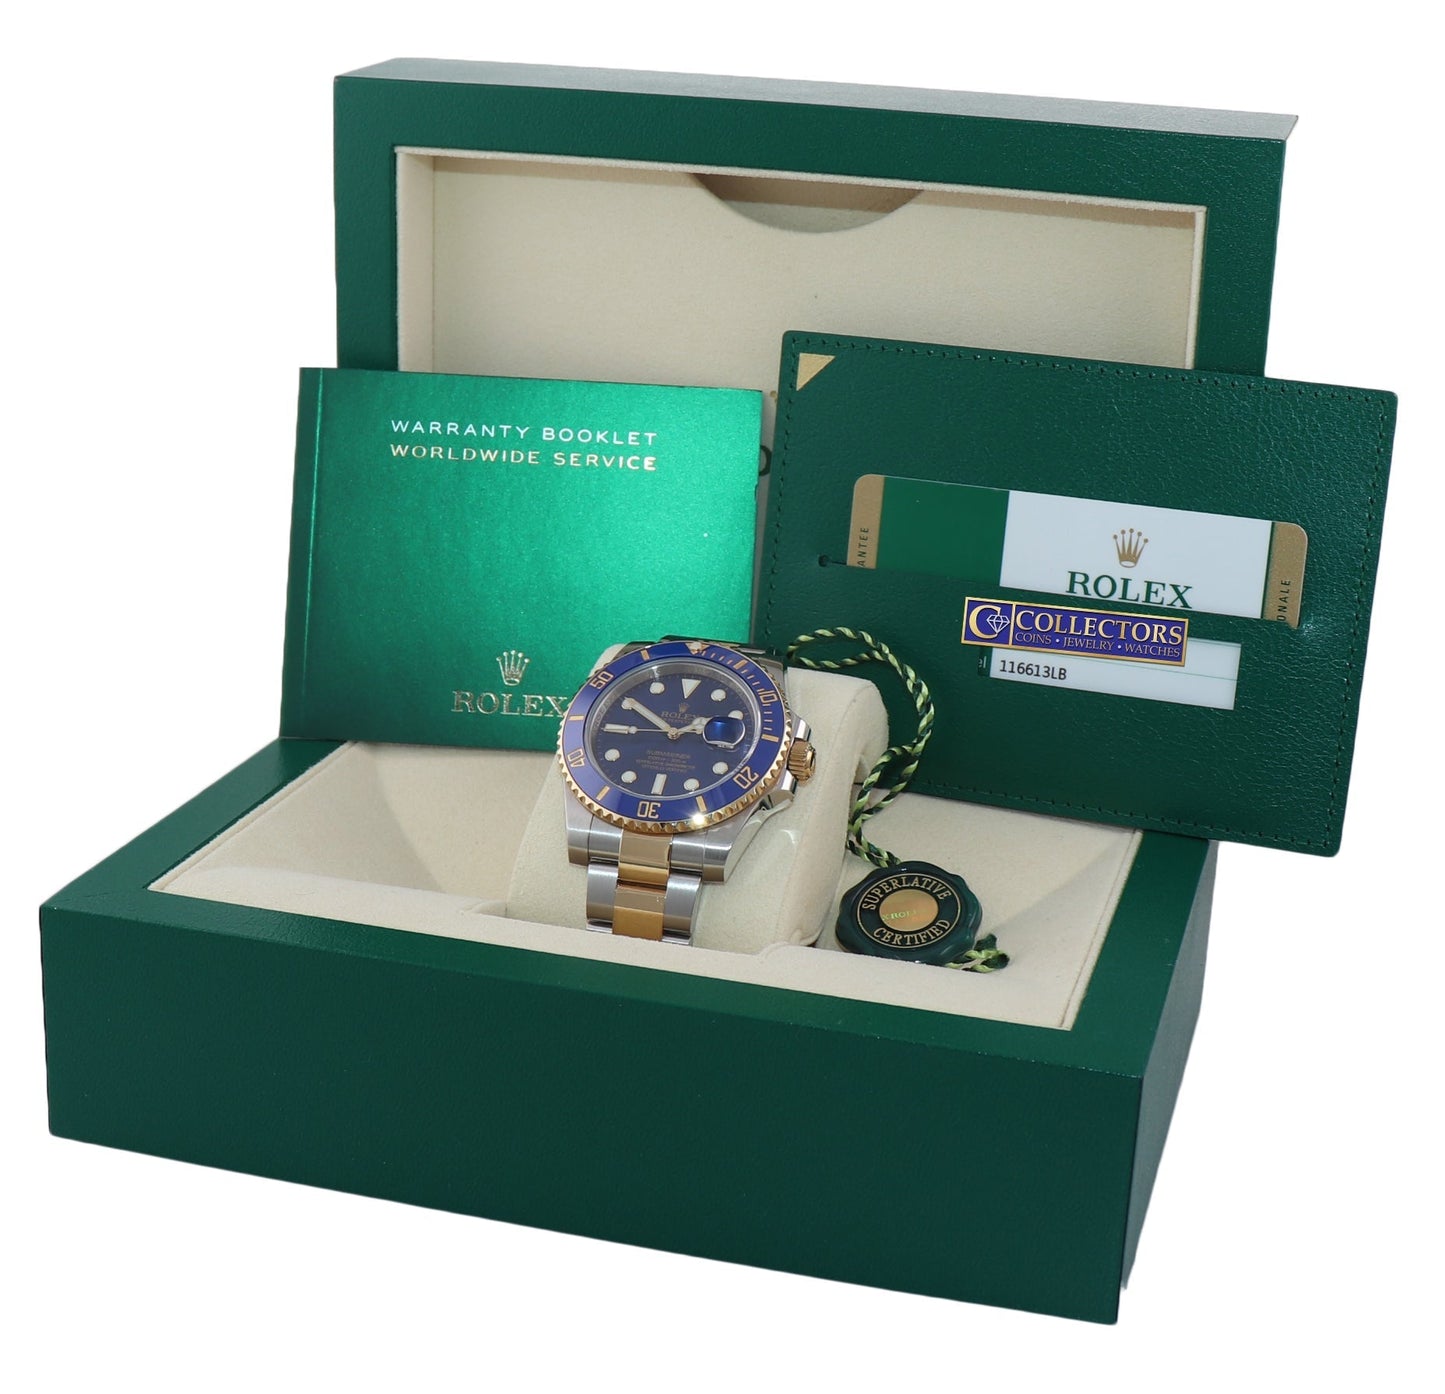 MINT 2019 BOX PAPERS Rolex Submariner Blue Ceramic 116613 Two Tone Gold Watch